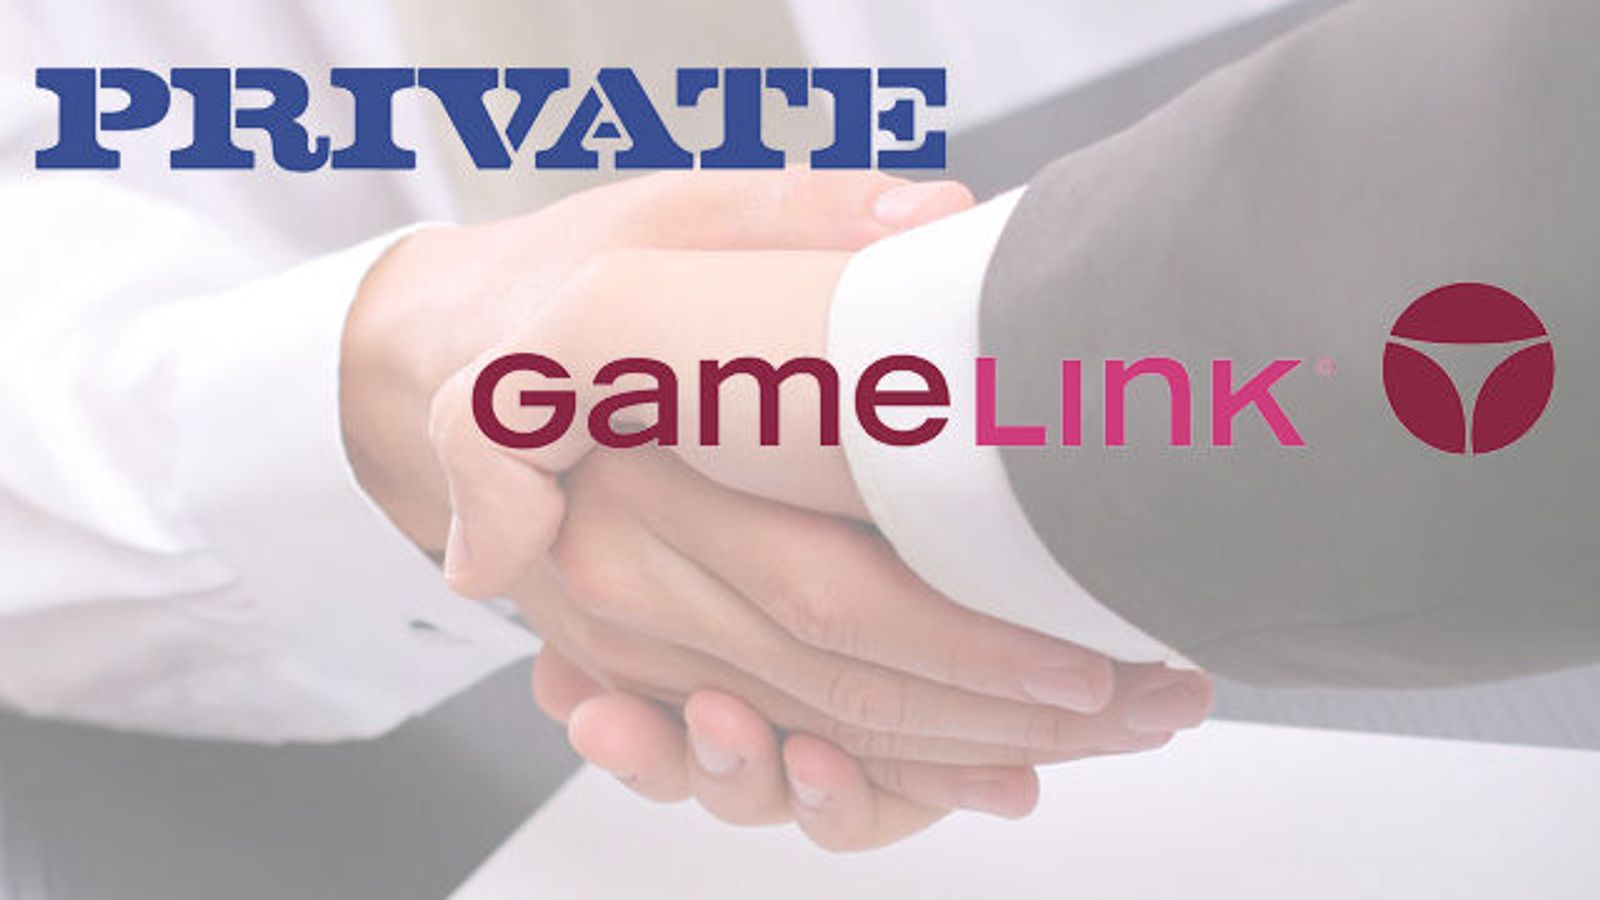 Bunimovitz Gets Gamelink Back, Resigns From Private Board